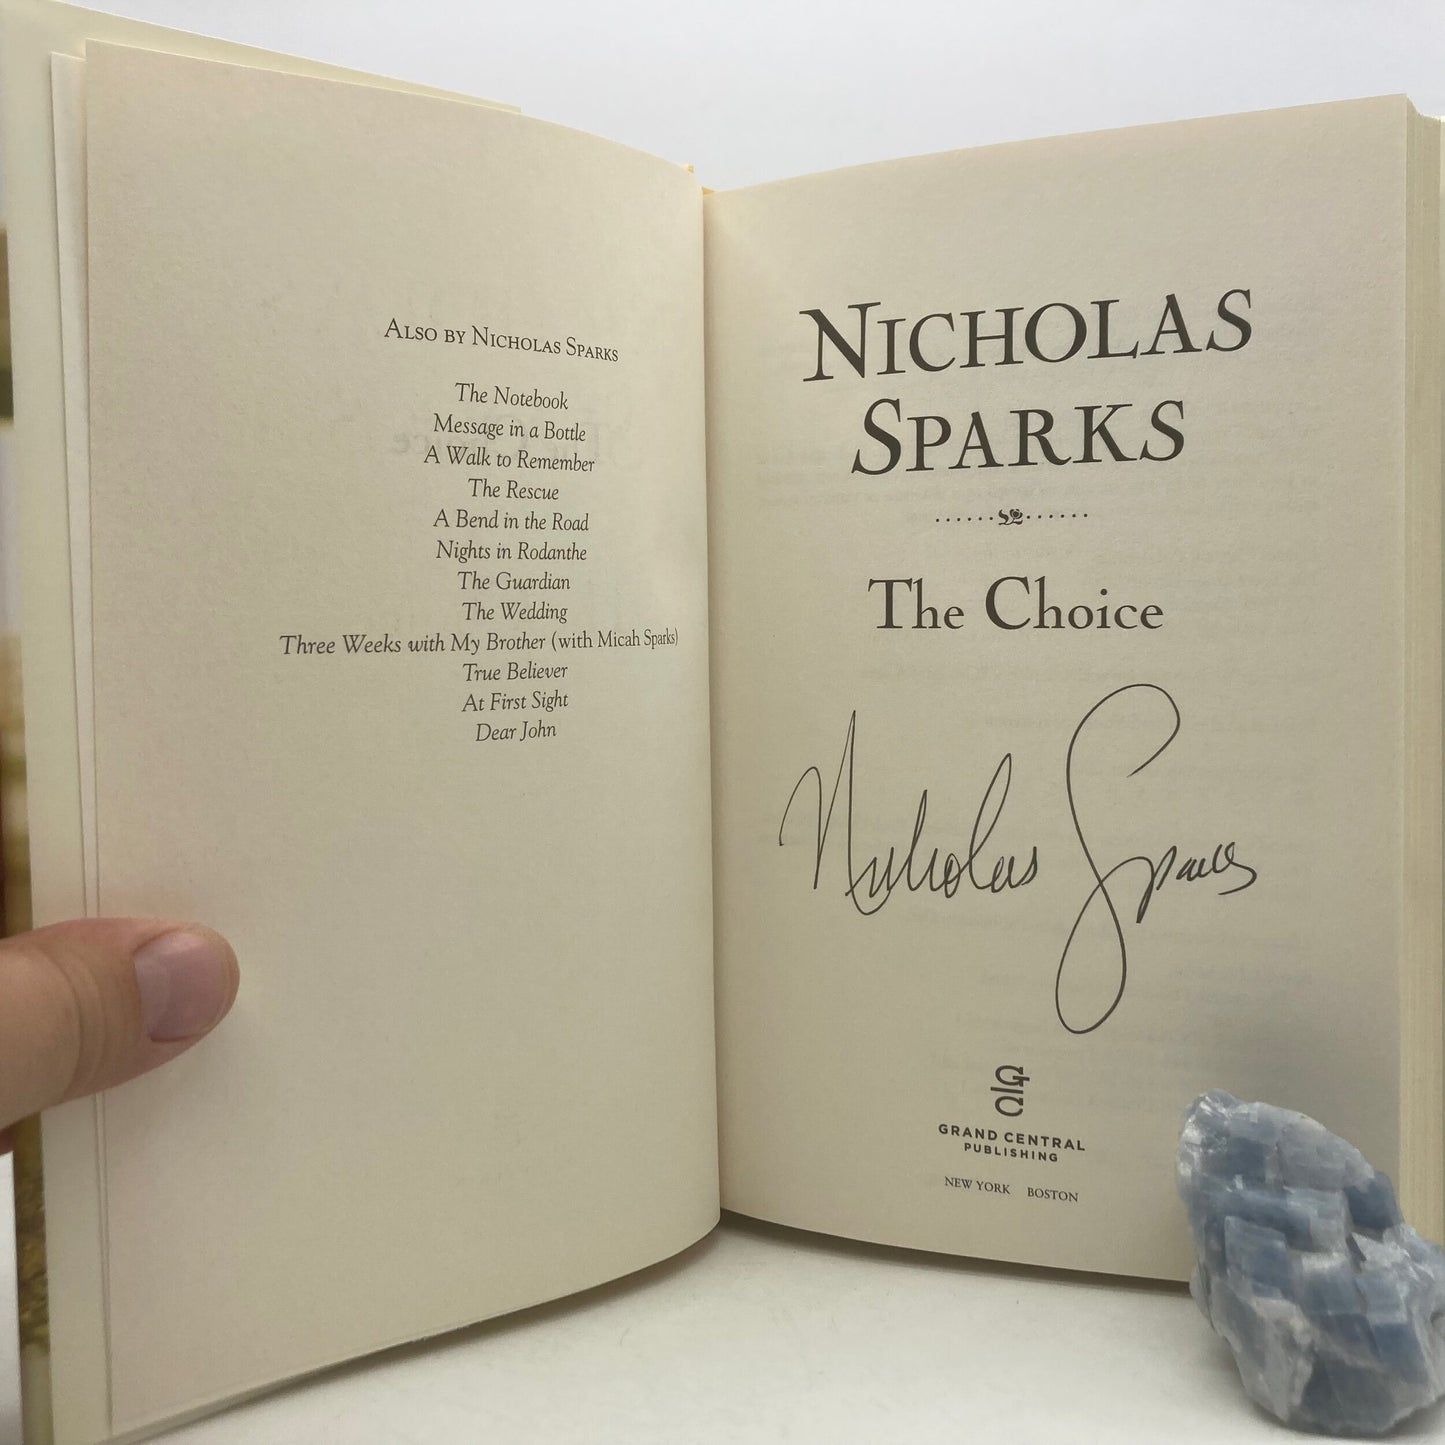 SPARKS, Nicholas "The Choice" [Grand Central Publishing, 2007] 1st Edition (Signed) - Buzz Bookstore